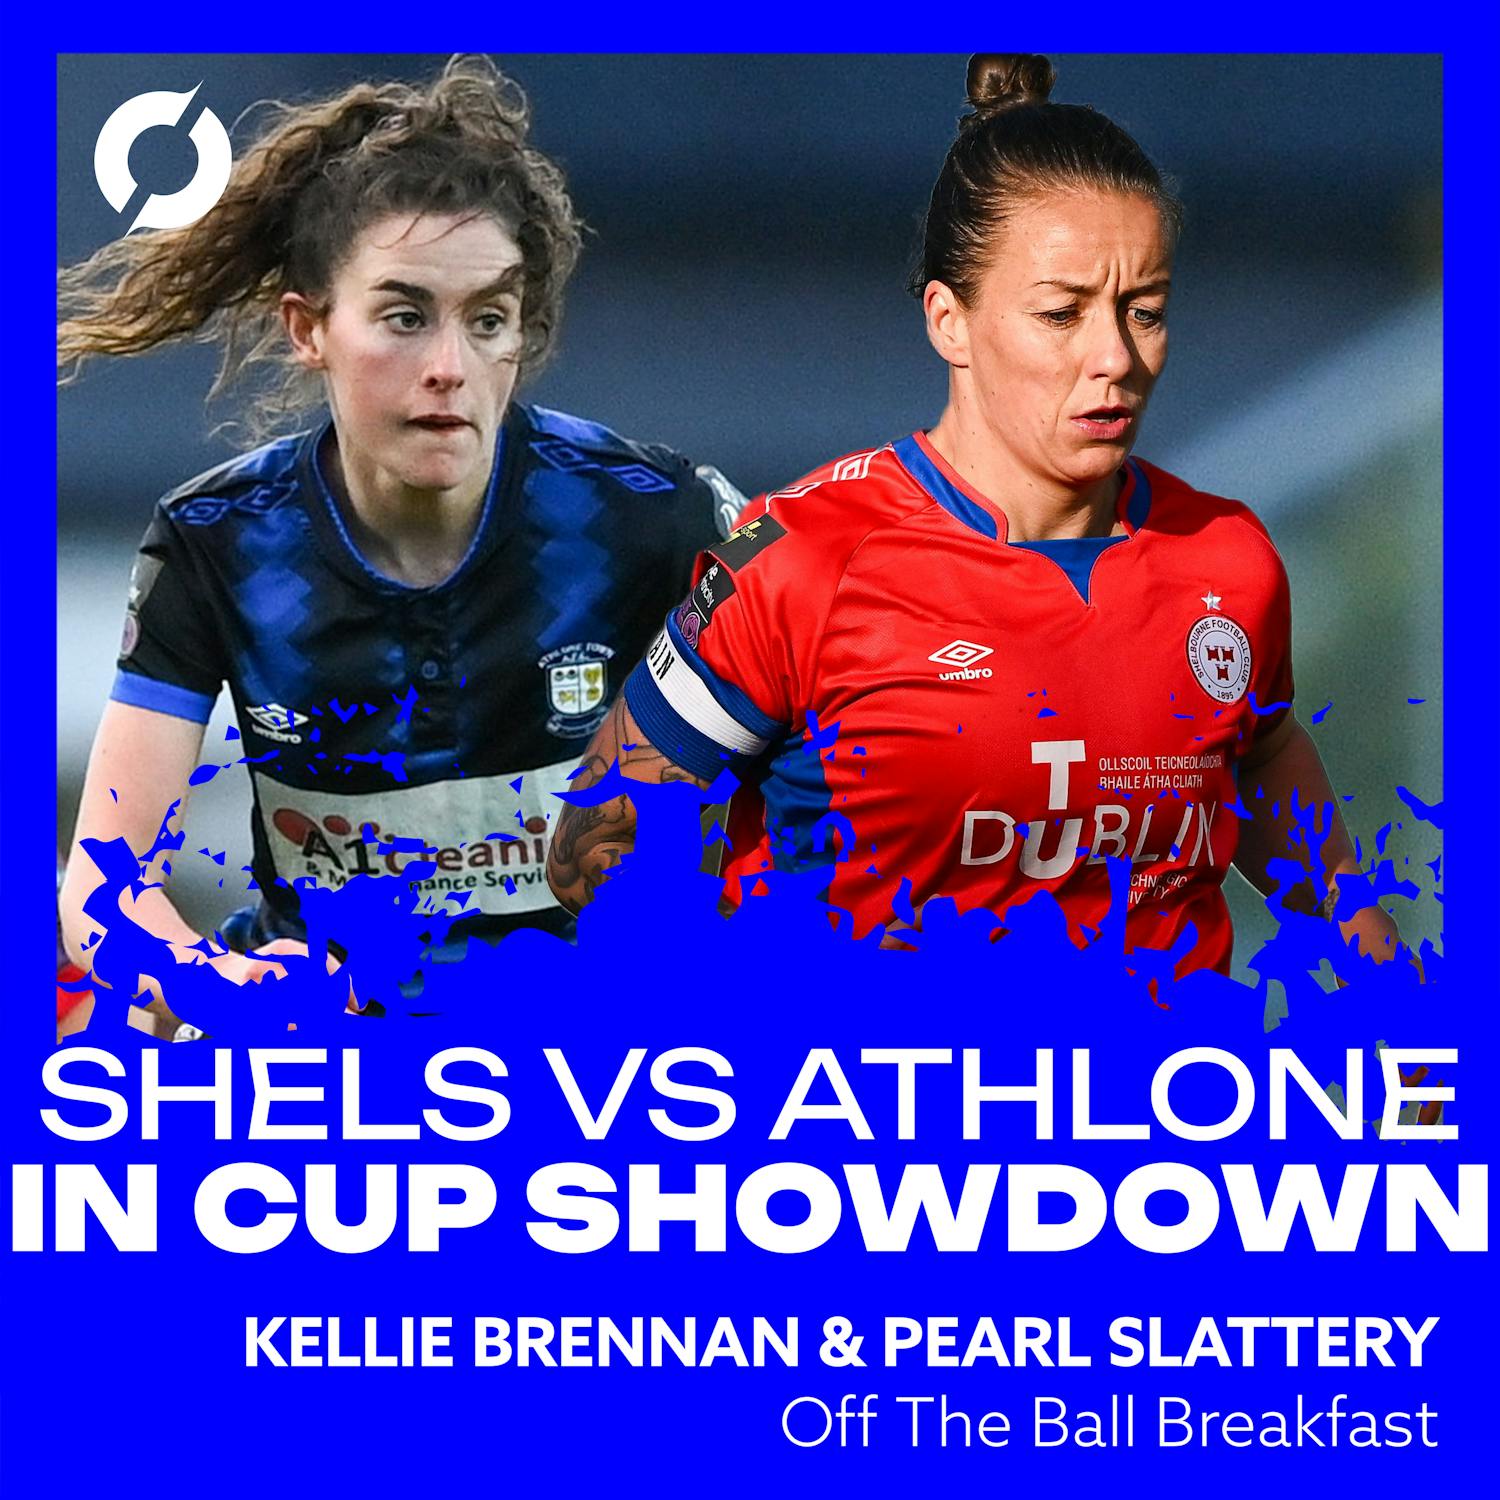 Shelbourne-Athlone Town rivalry ready to go again at Cup final | Pearl Slattery & Kellie Brennan